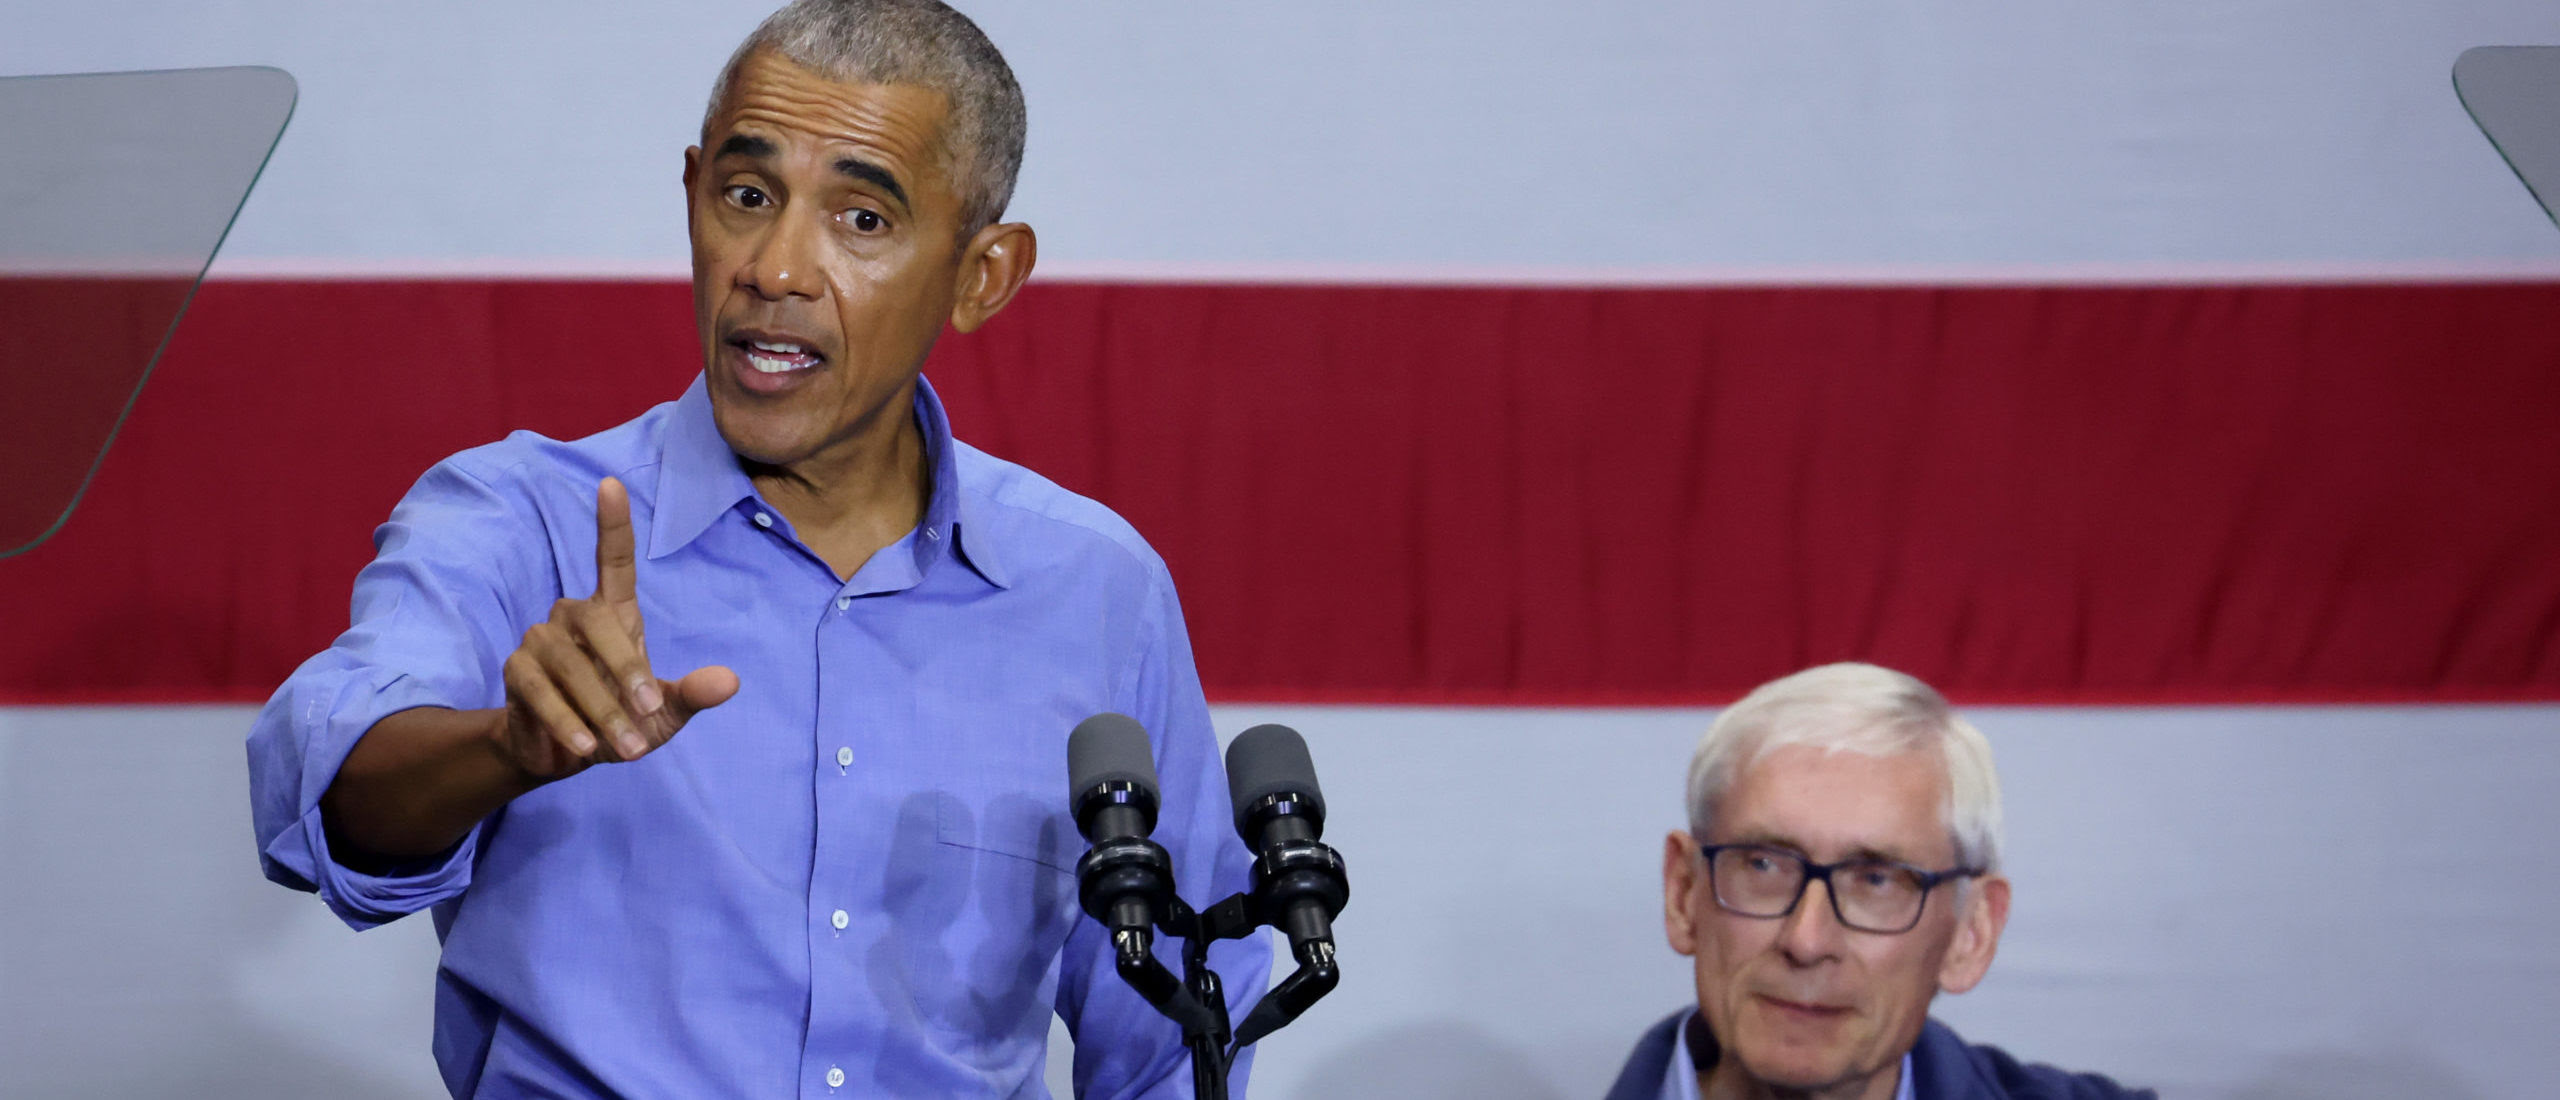 Democrats Use Barack Obama In Attempt To Resuscitate Midterm Chances